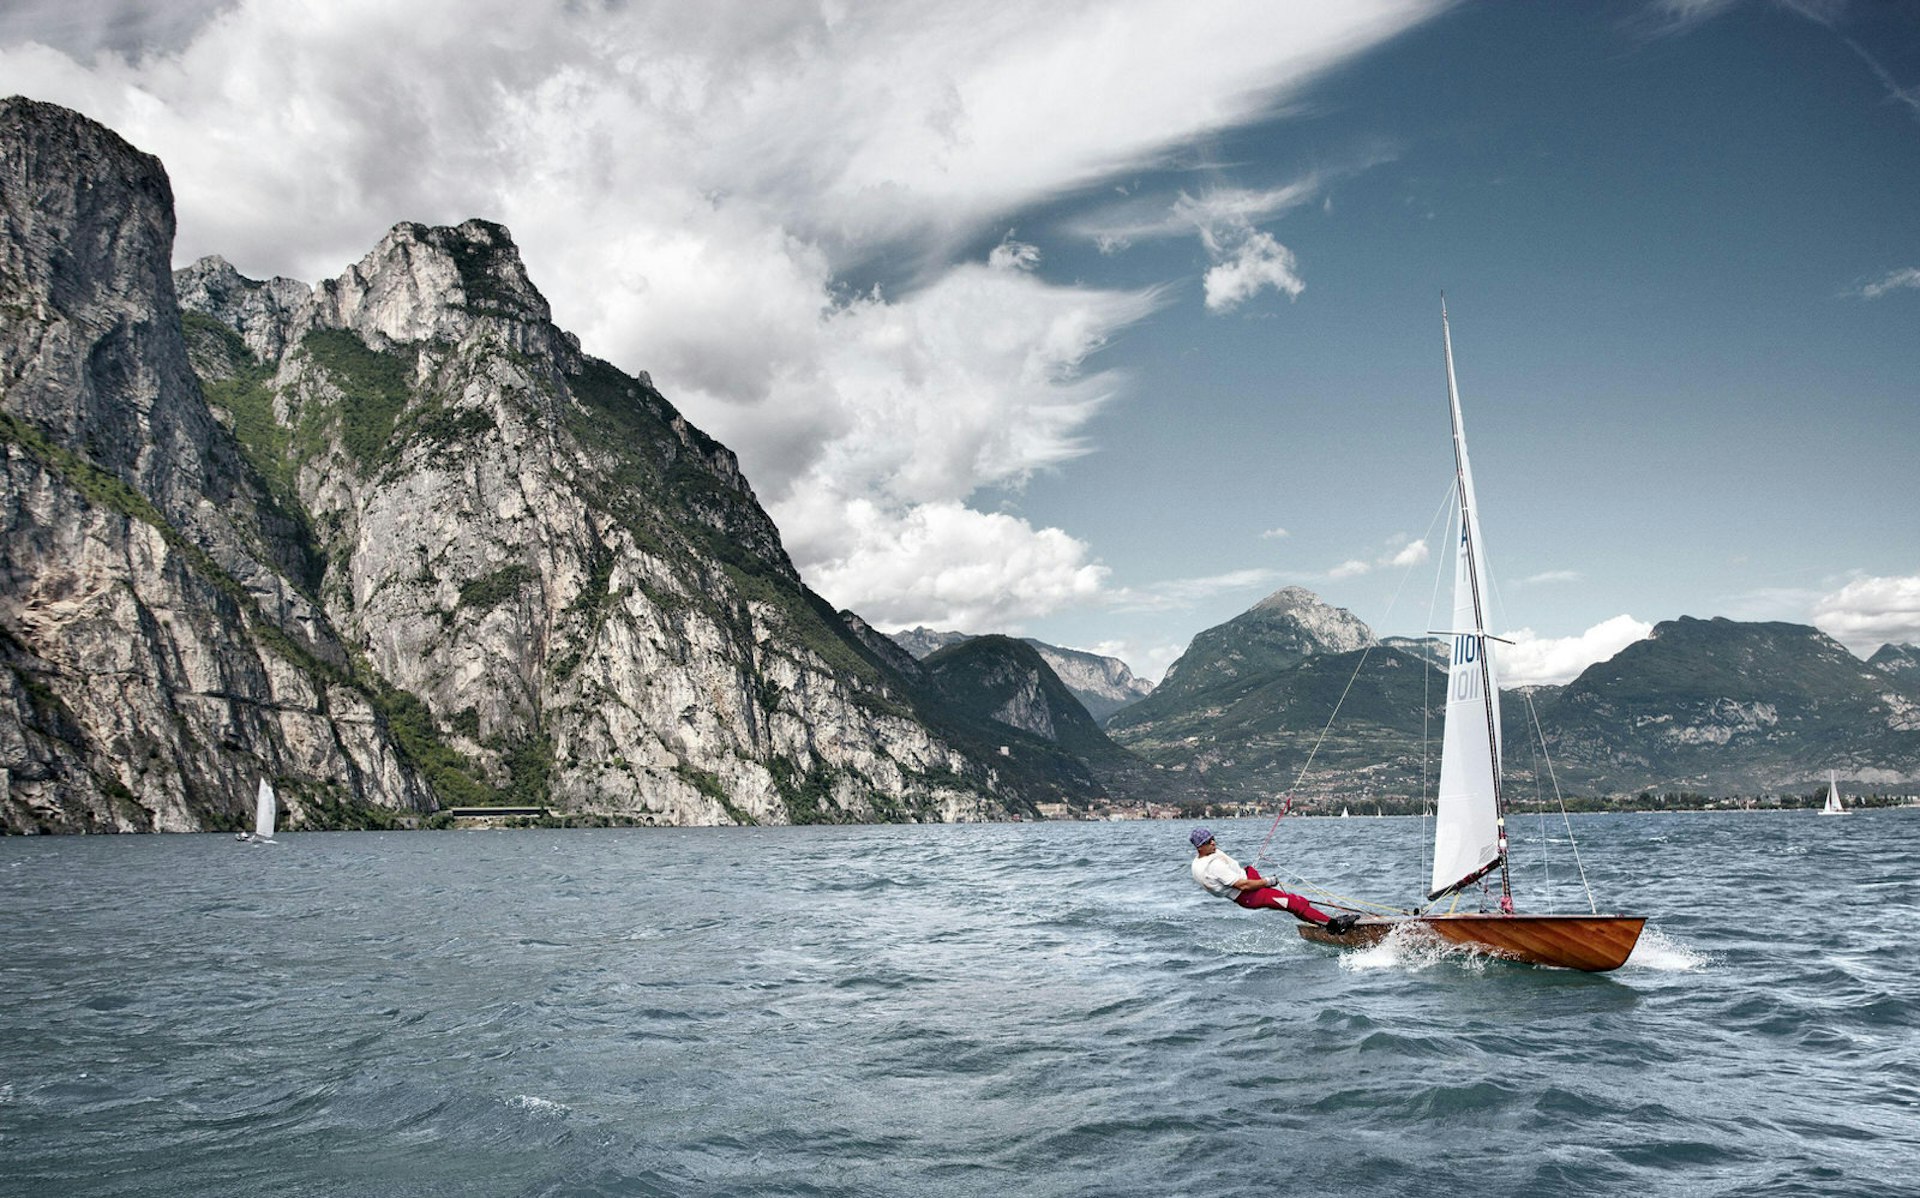 A sailor leans off the deck of his boat as he speeds through the waters of Lake Garda